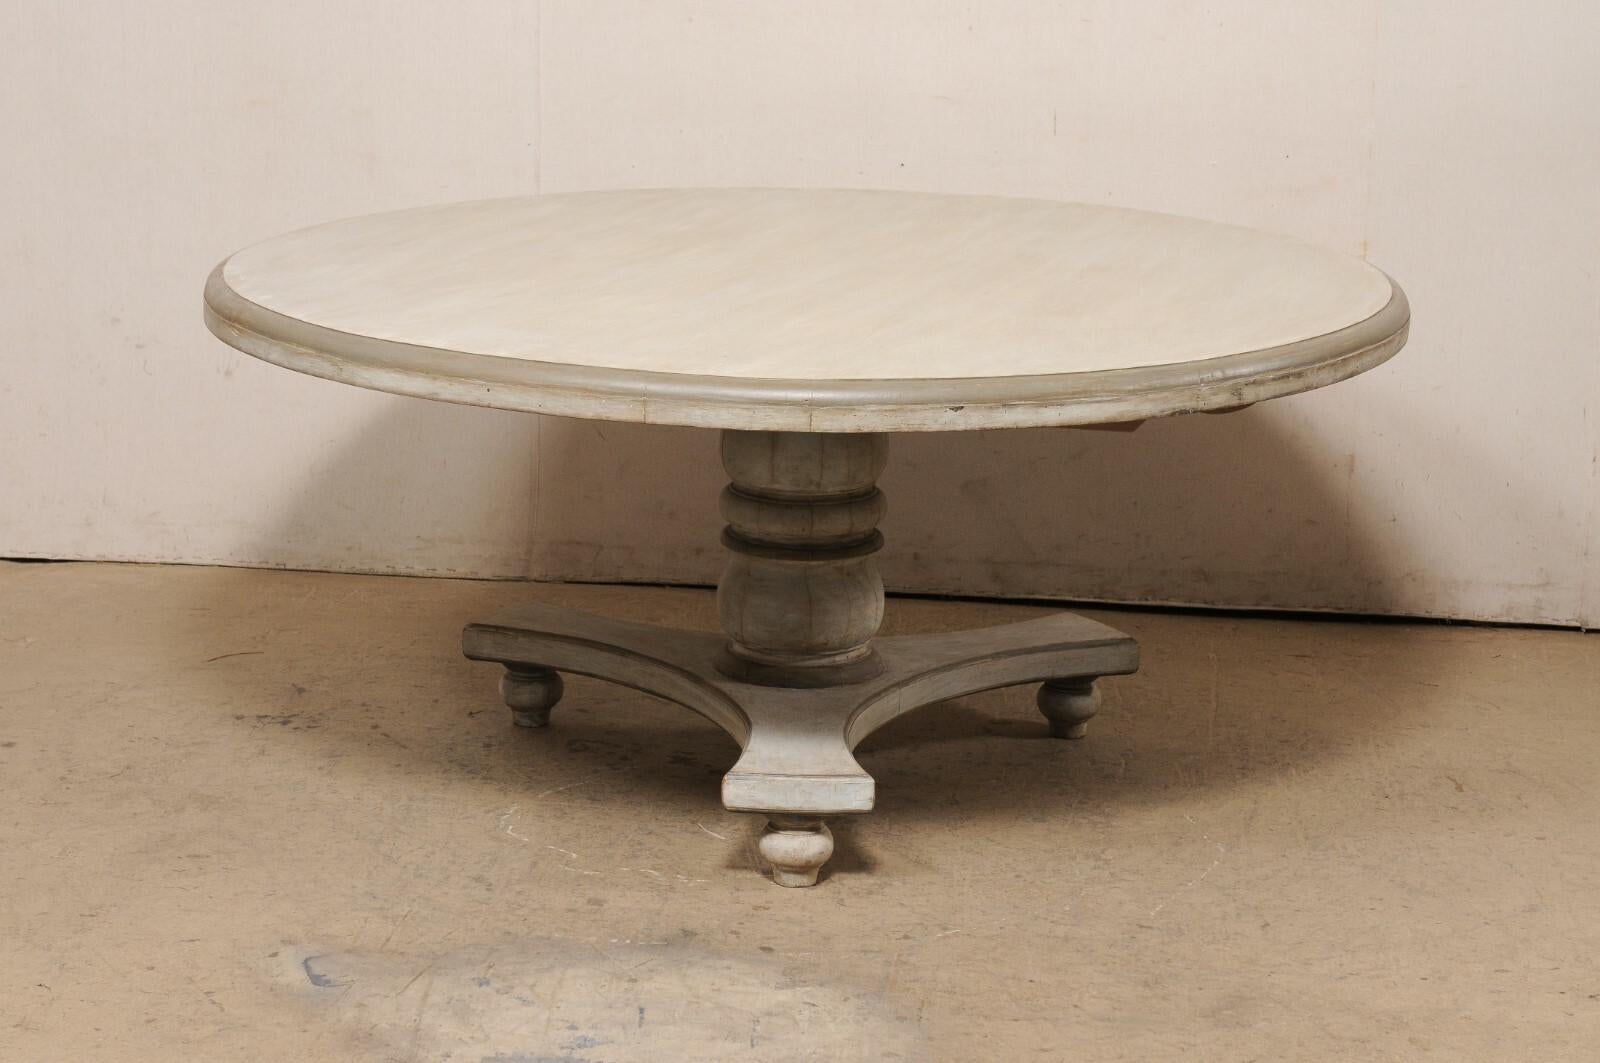 Painted Teak Round-Shaped Pedestal Dining Table, 5.5 Ft Diameter For Sale 2